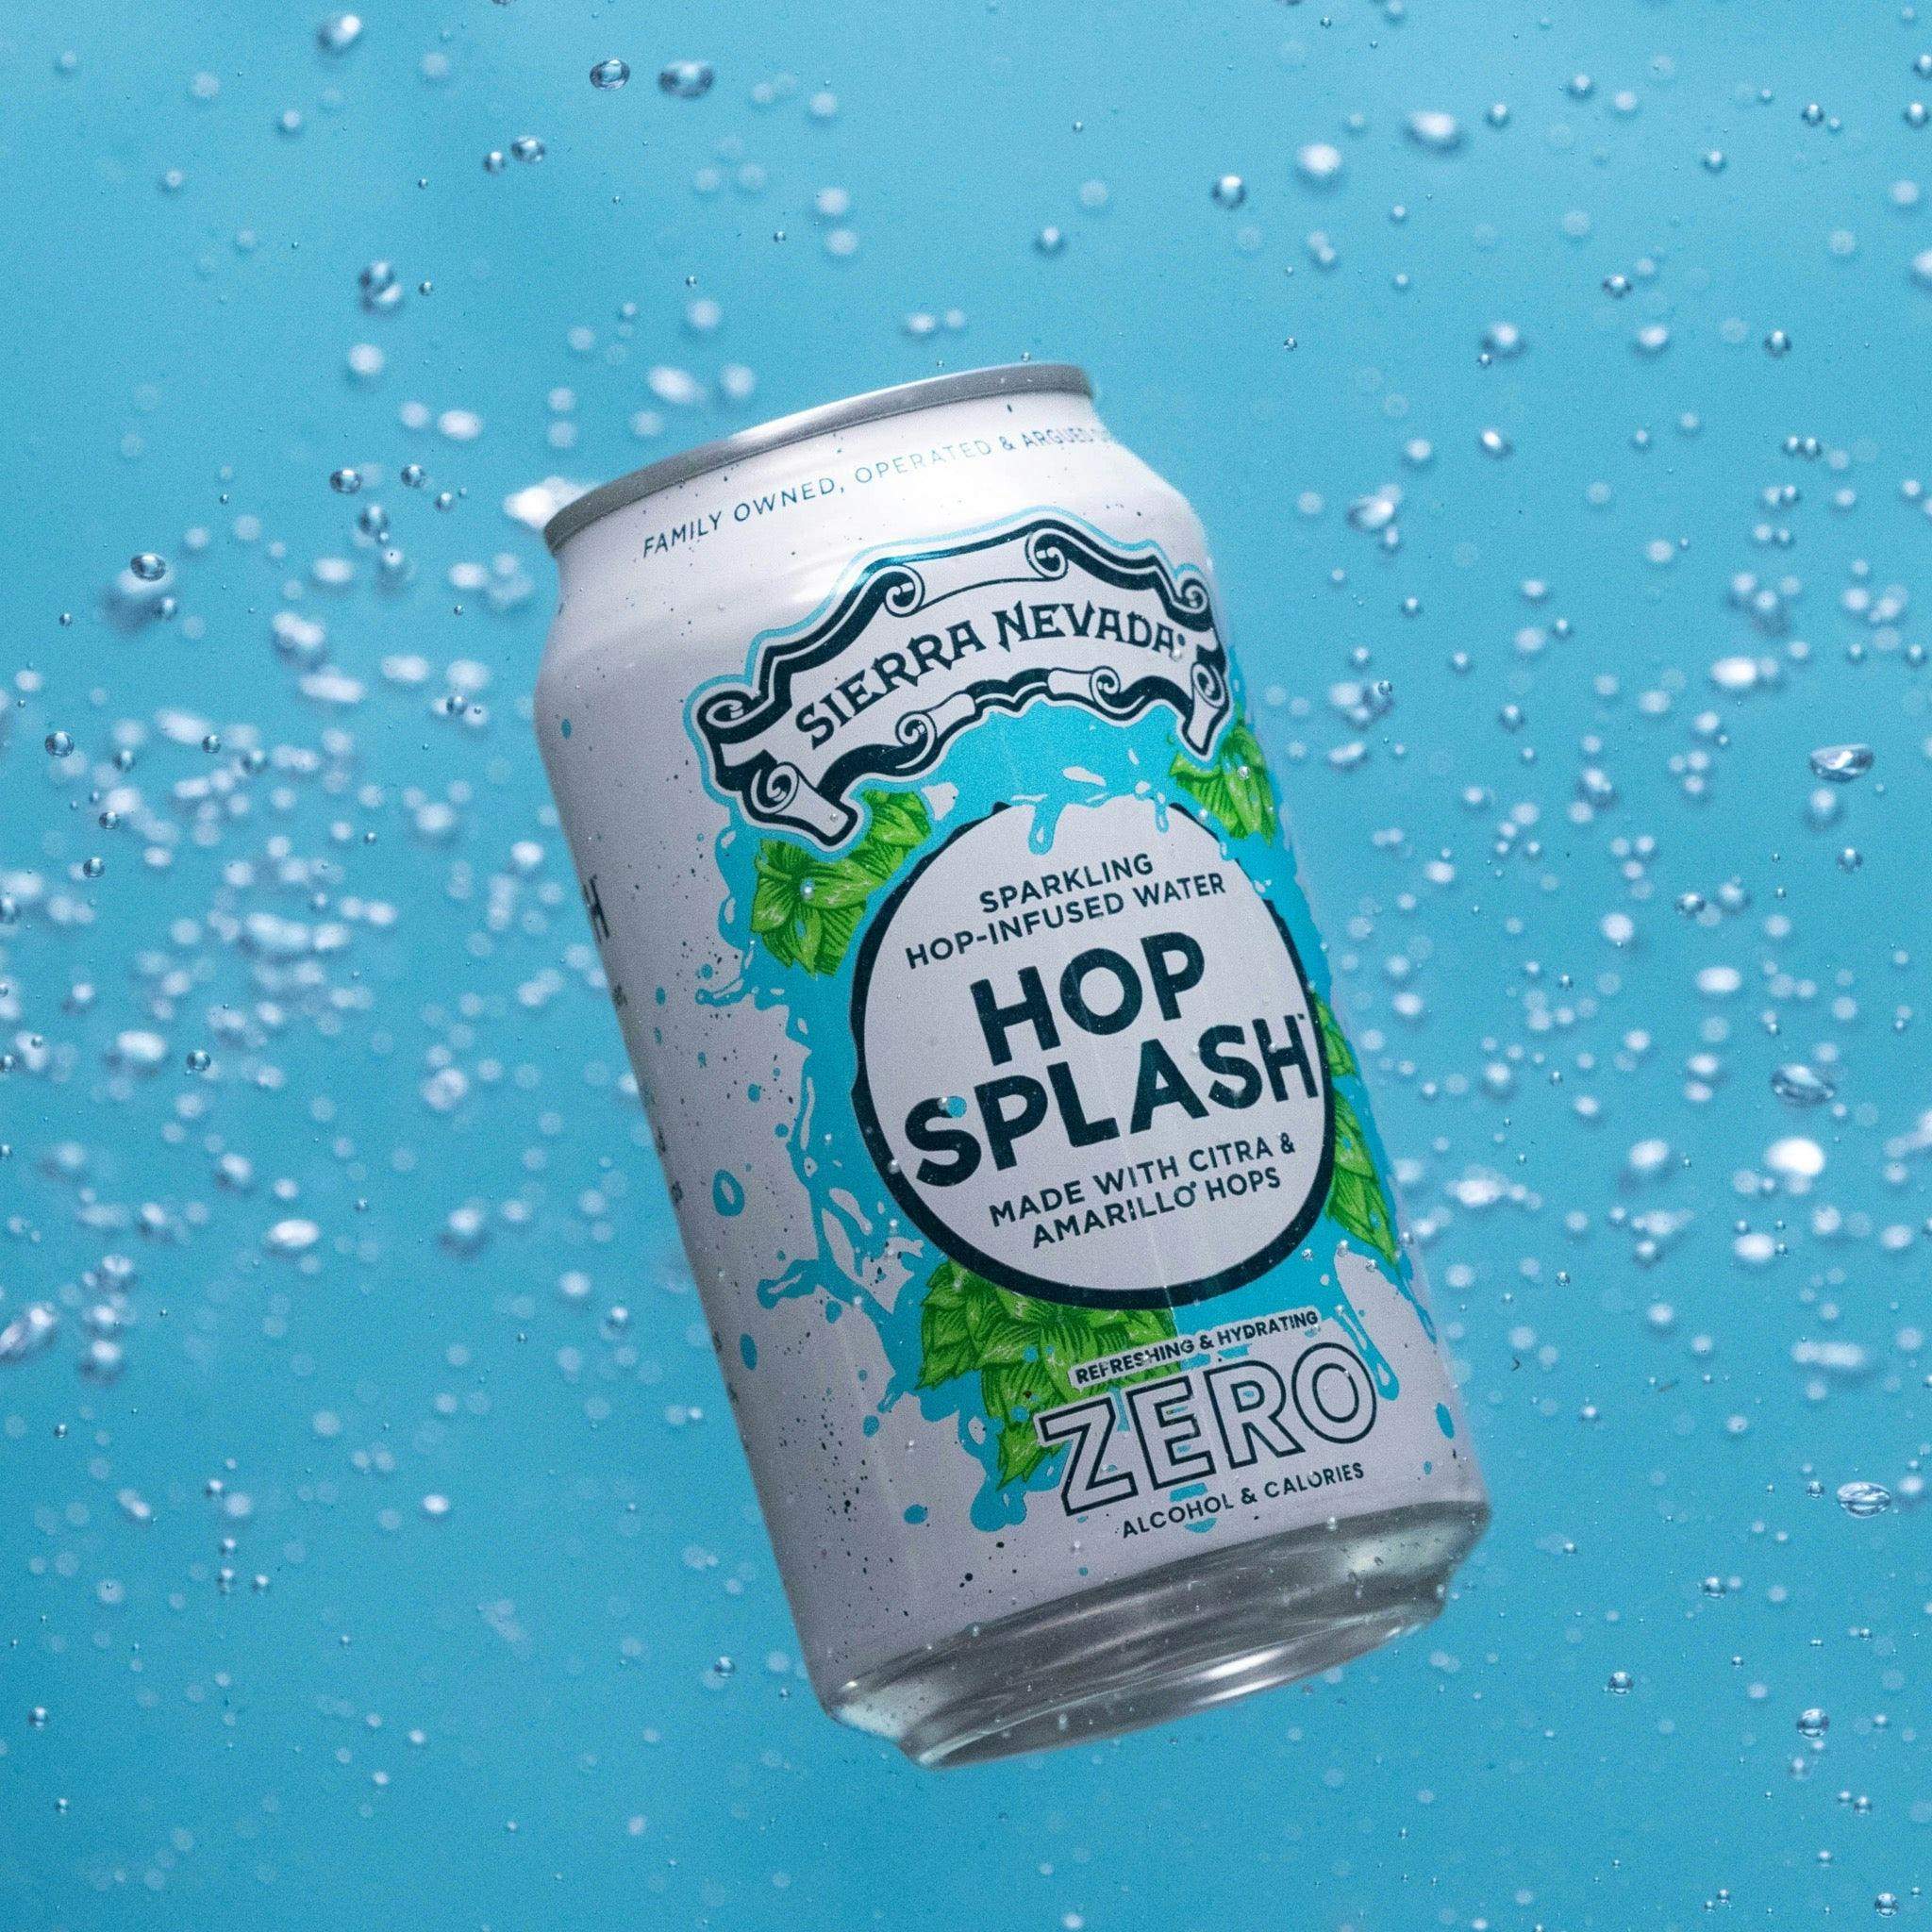 A 12oz can of Sierra Nevada Hop Splash floating in blue bubbly water